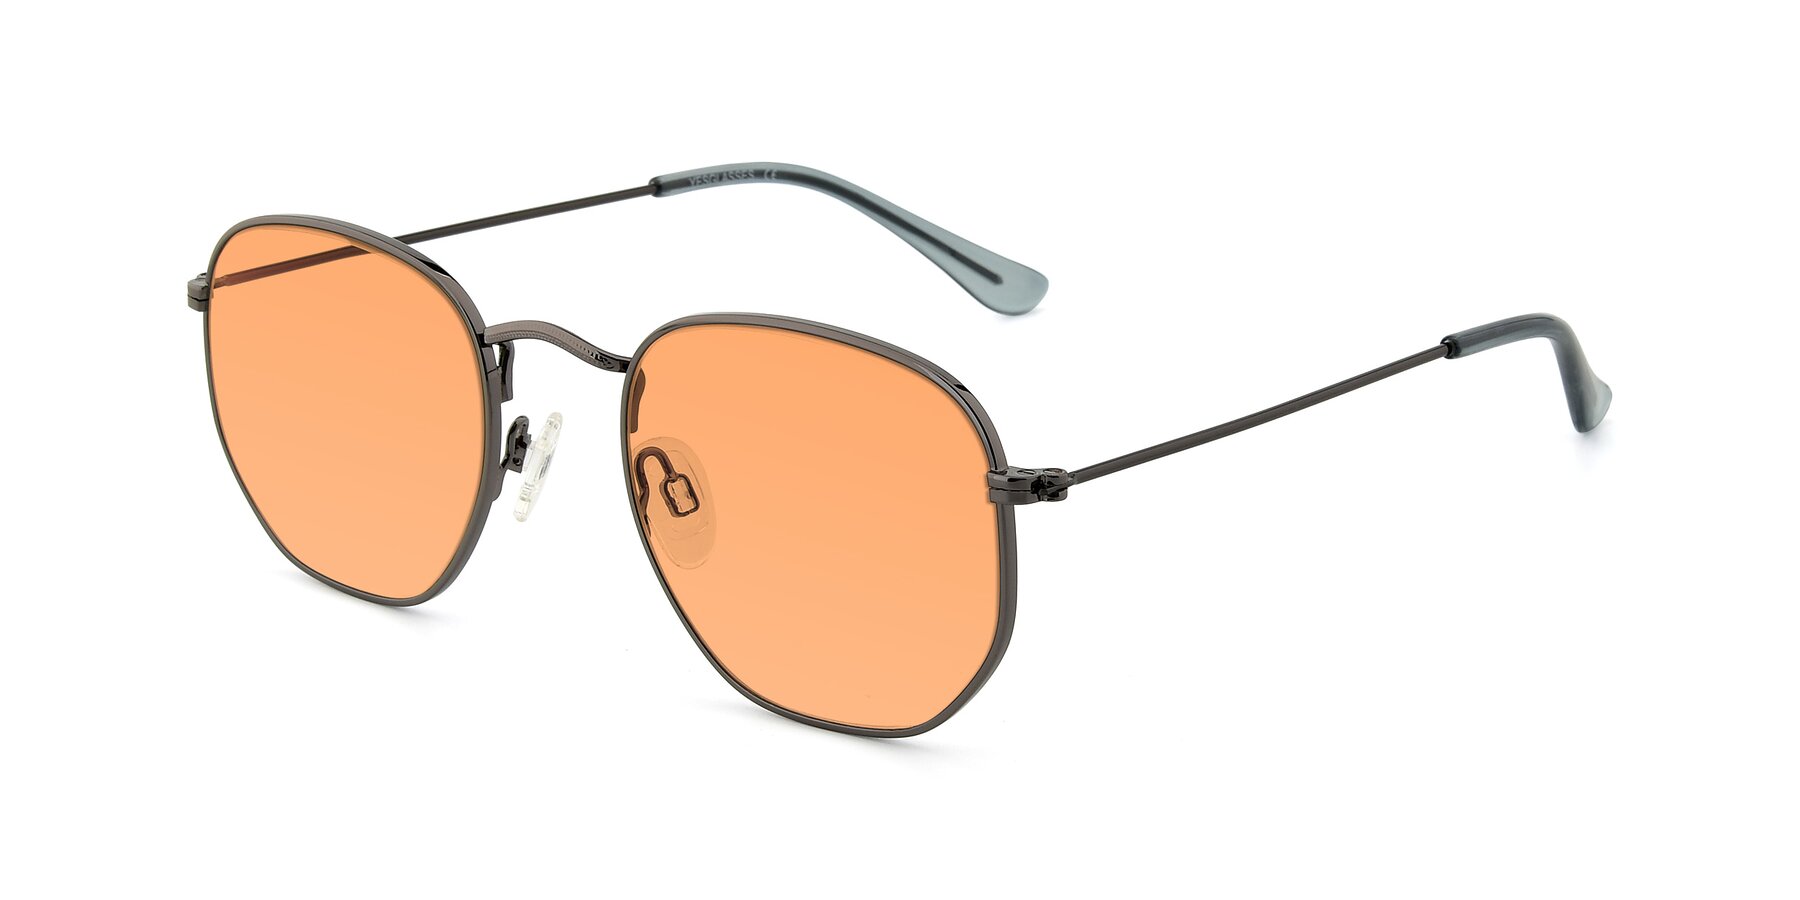 Angle of SSR1943 in Grey with Medium Orange Tinted Lenses